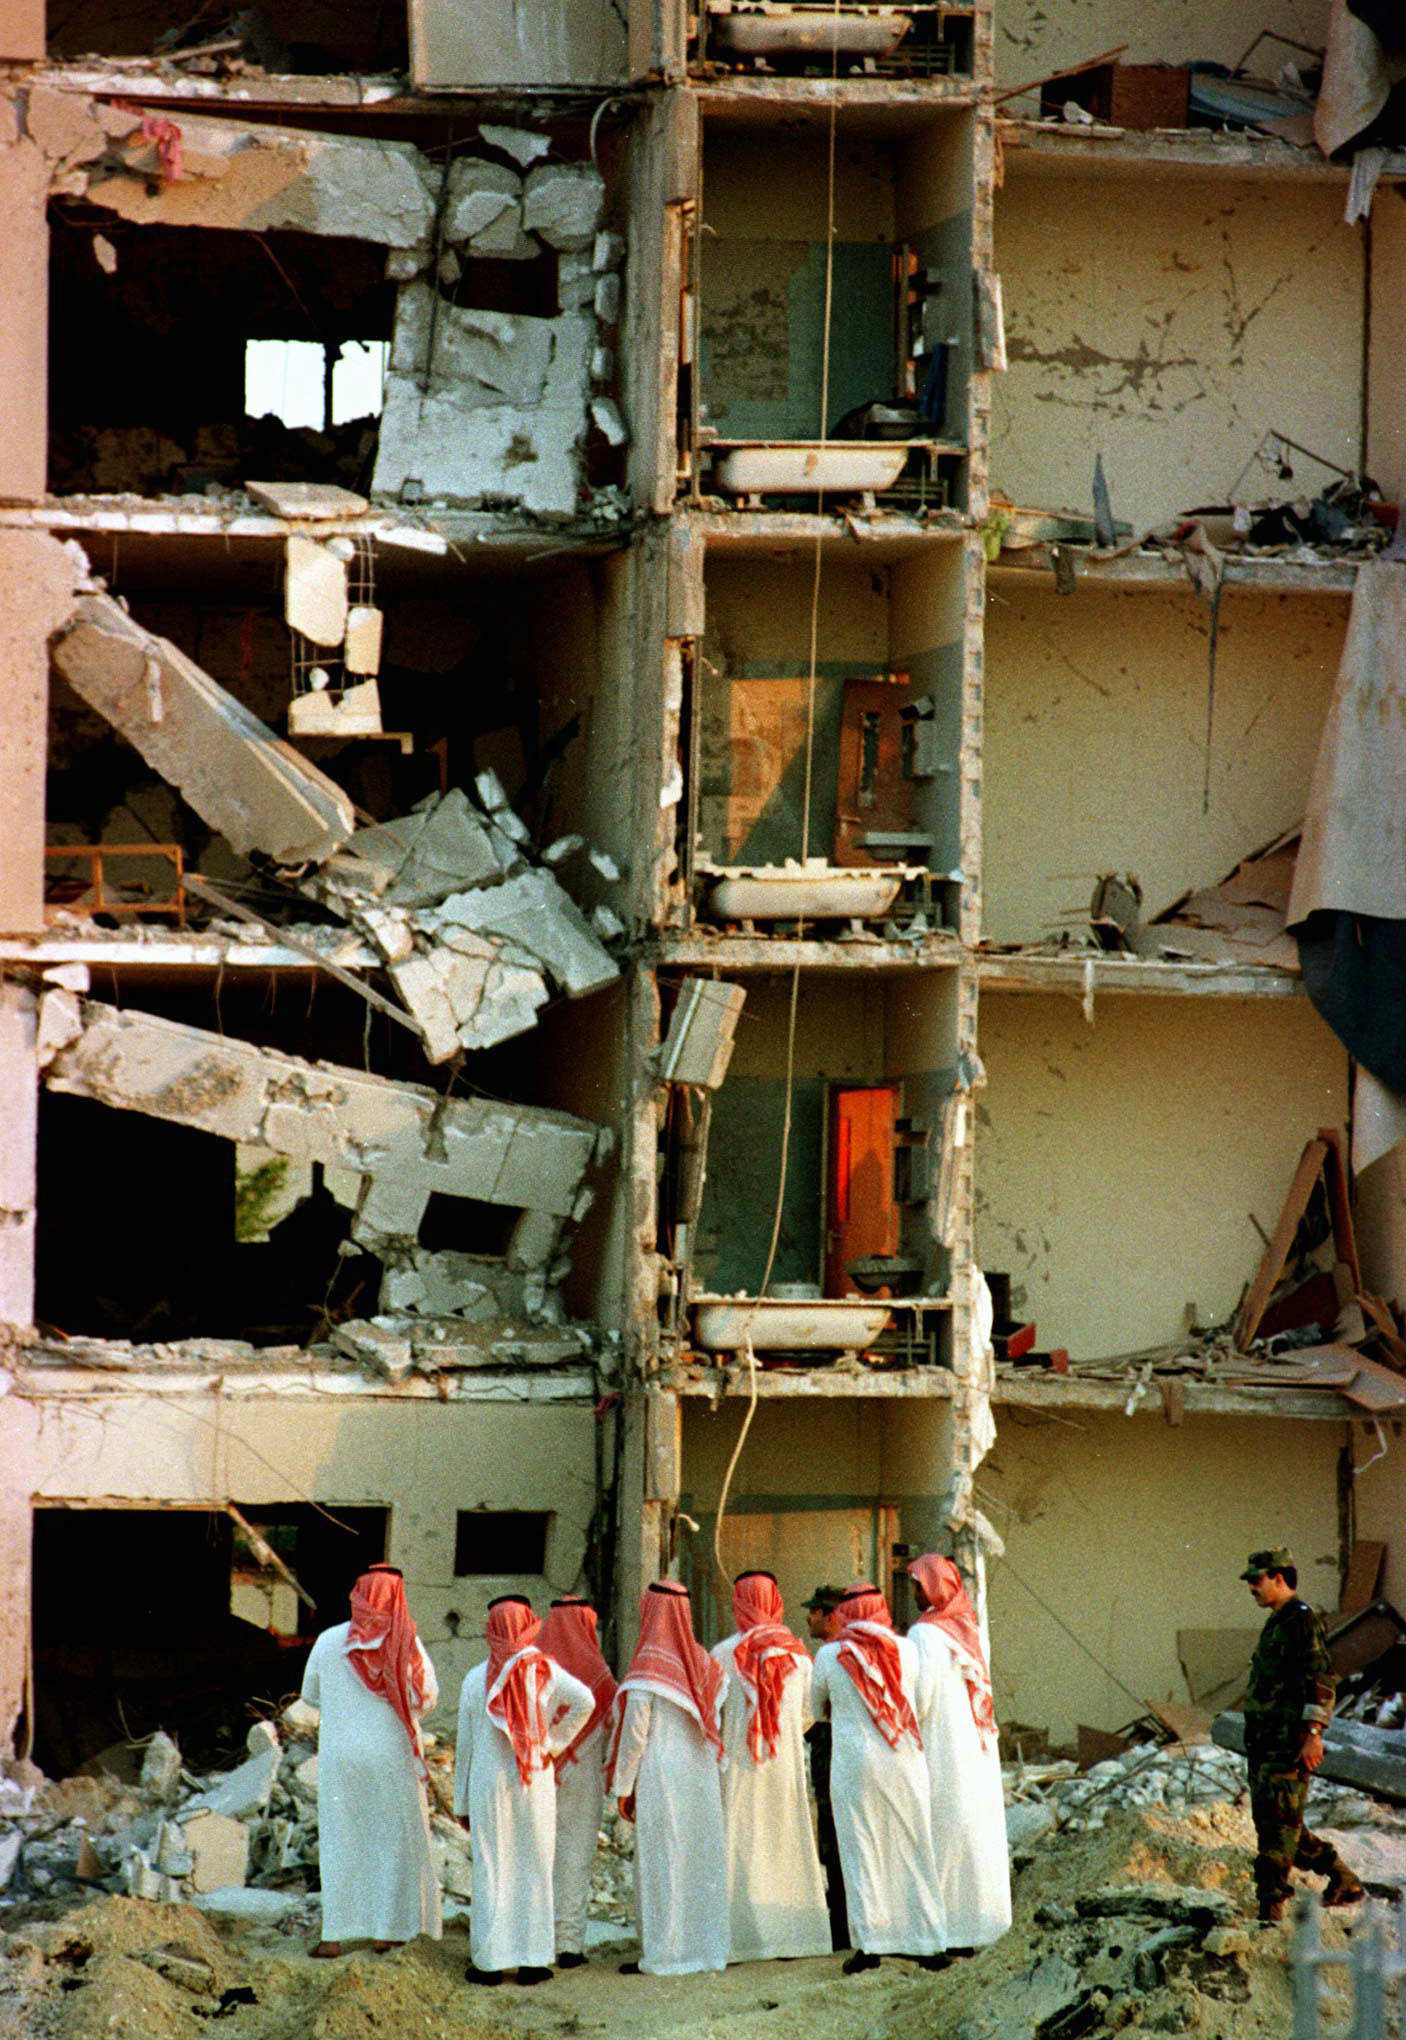 A group of Saudi officials investigate the site of the bomb-damaged Khobar Towers housing complex, at a U.S. military base in Dhahran, where 19 Americans were killed, and several hundred injured when a car bomb exploded. June 27, 1996. (AP/Greg Bos)